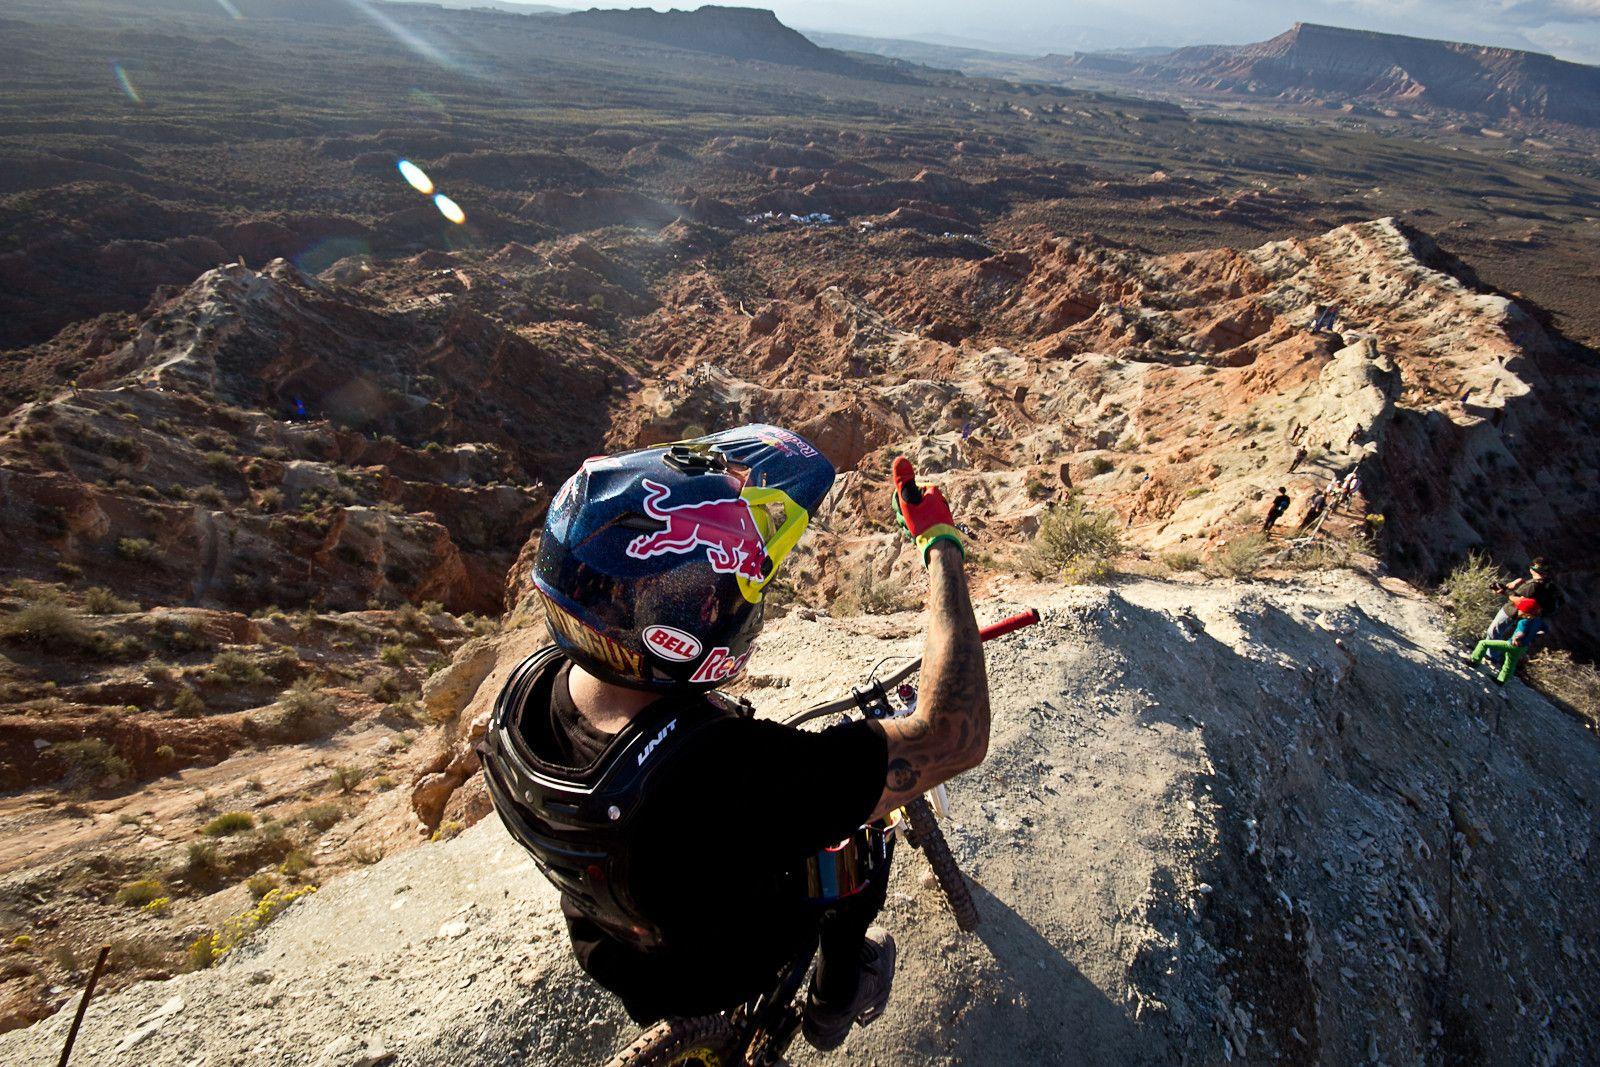 Confirmed: New Red Bull Rampage Site for 2014 With Photo